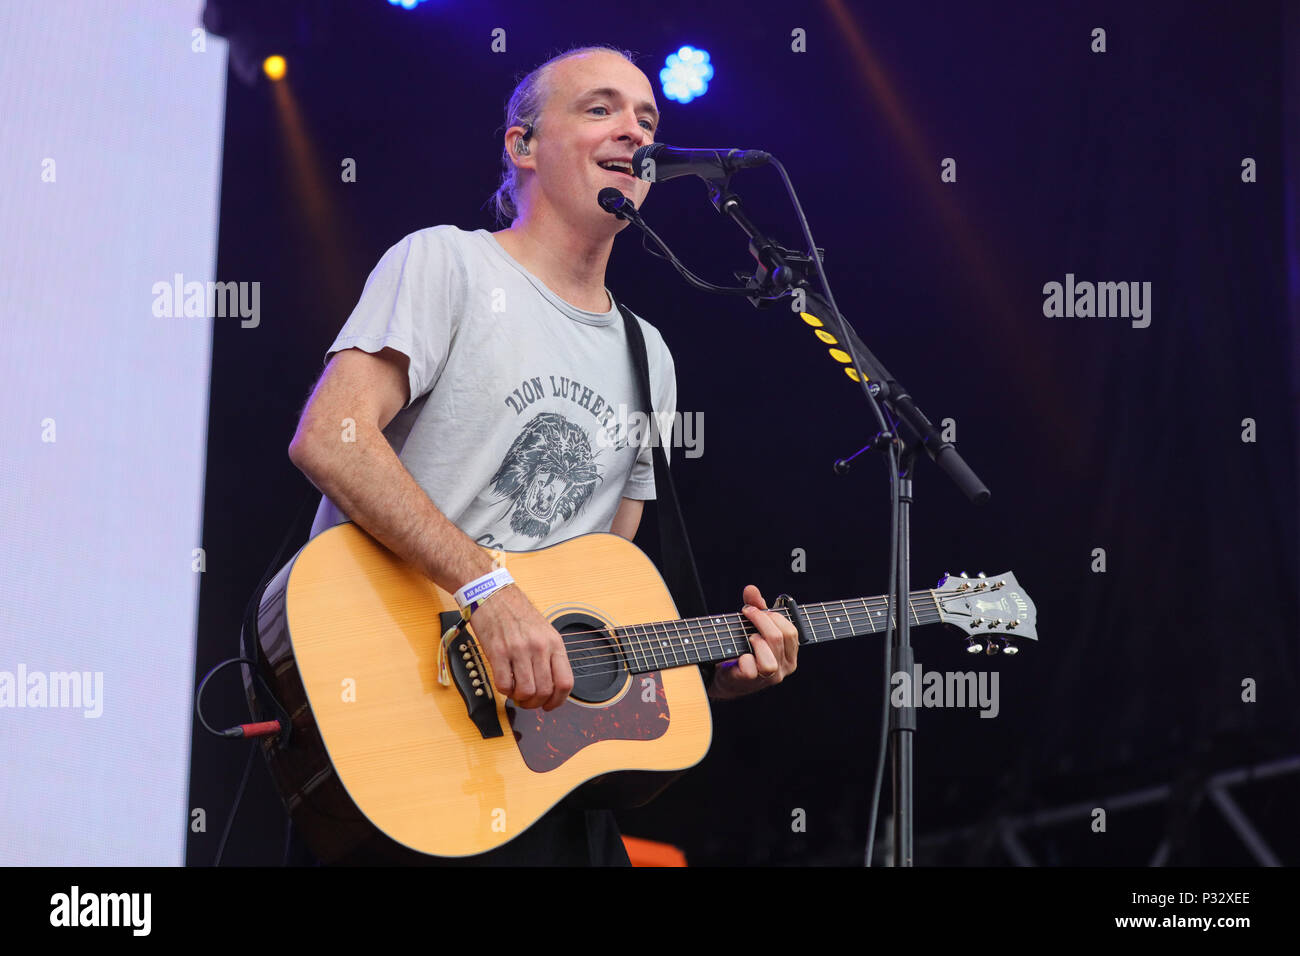 Norway, Oslo - June 17, 2018. The Scottish rock band Travis performs a live concert during the Norwegian music festival Piknik i Parken 2018 in Oslo. Here singer Fran Healy is seen live on stage. (Photo credit: Gonzales Photo - Stian S. Moller). Stock Photo